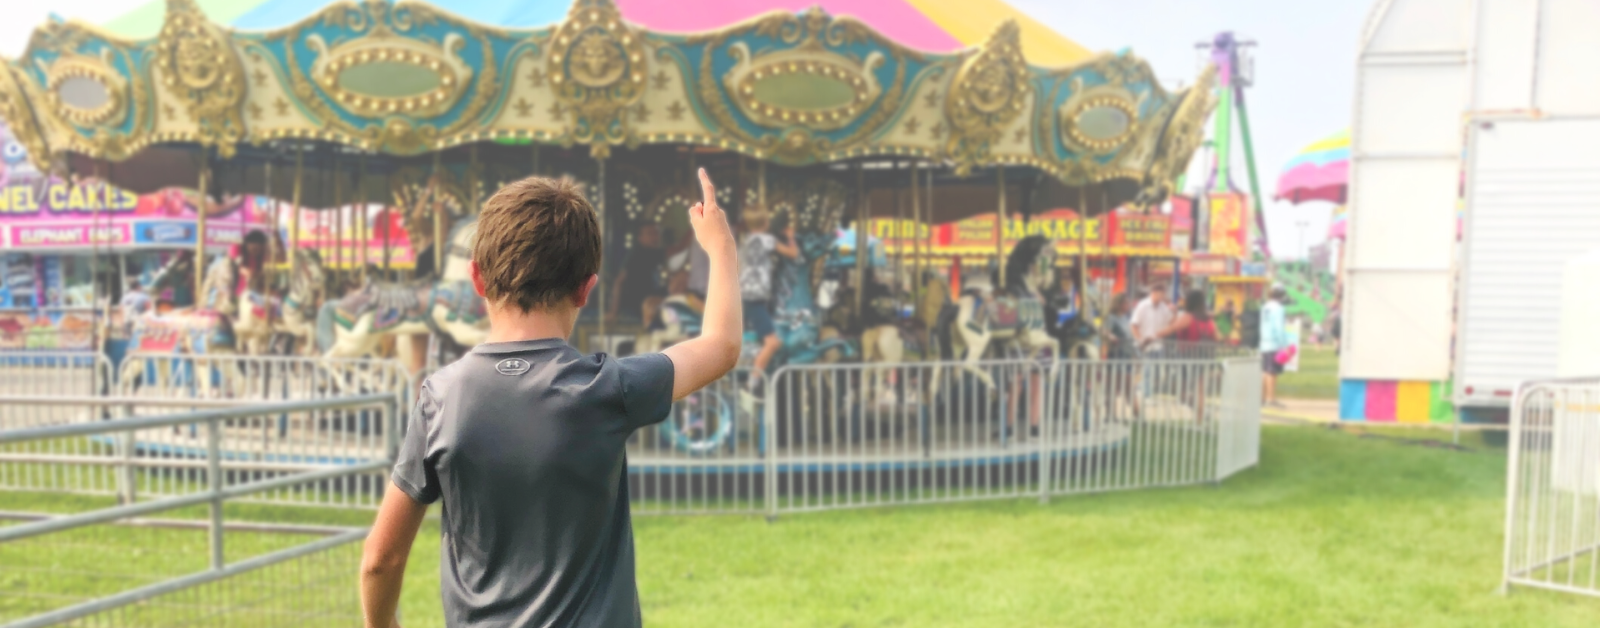 photo of a young teen pointing to a colorful carousel